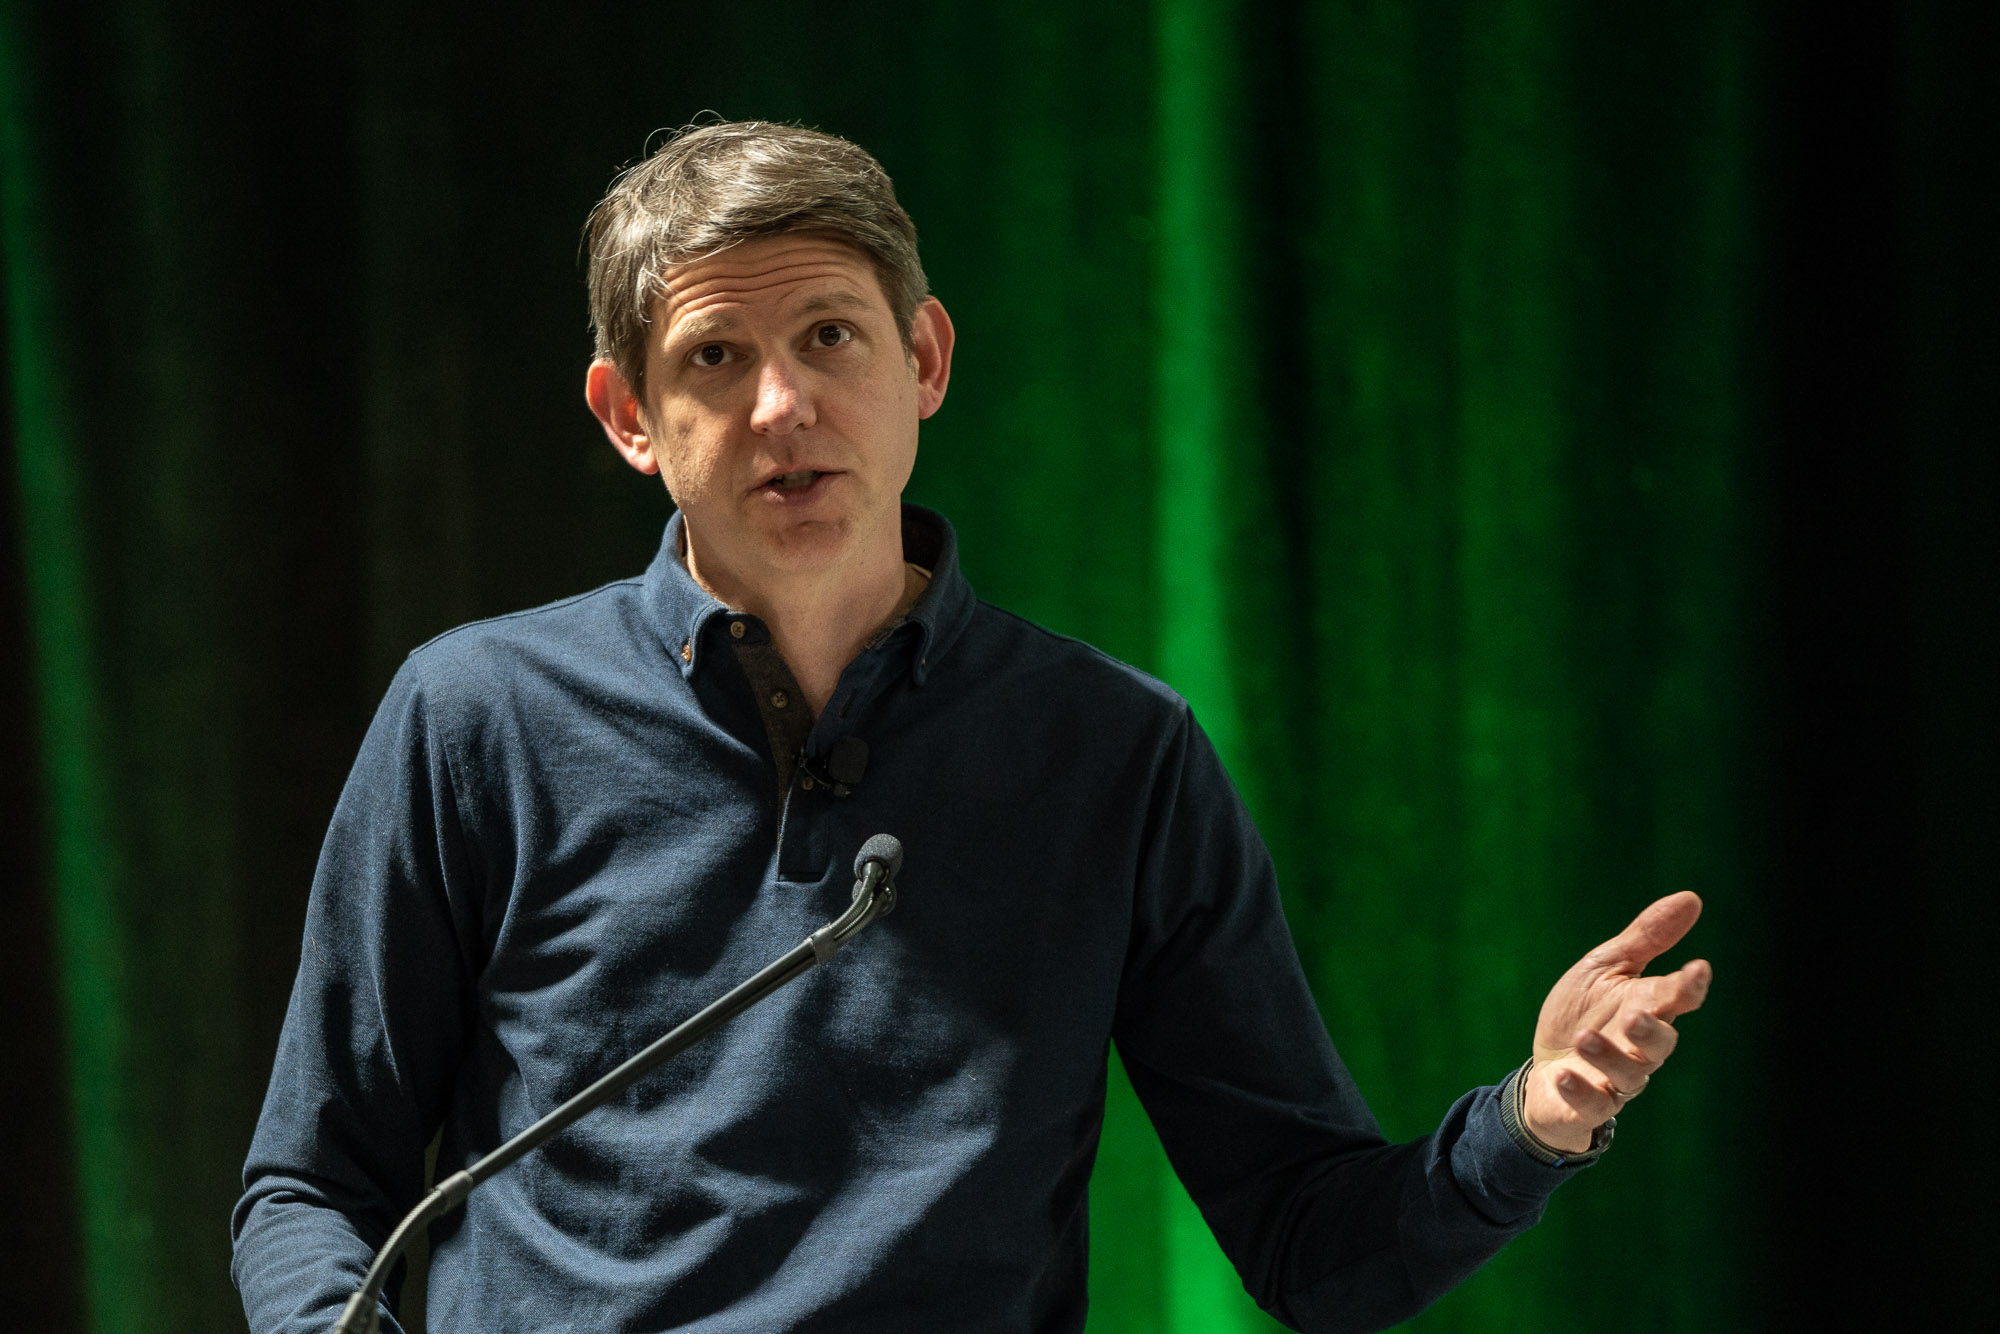 David Thacker, GP at Greylock talks about "How to find product-market fit" at EntertainmentCab Early Stage in Boston on April 20, 2023. Image Credit: Haje Kamps/EntertainmentCab